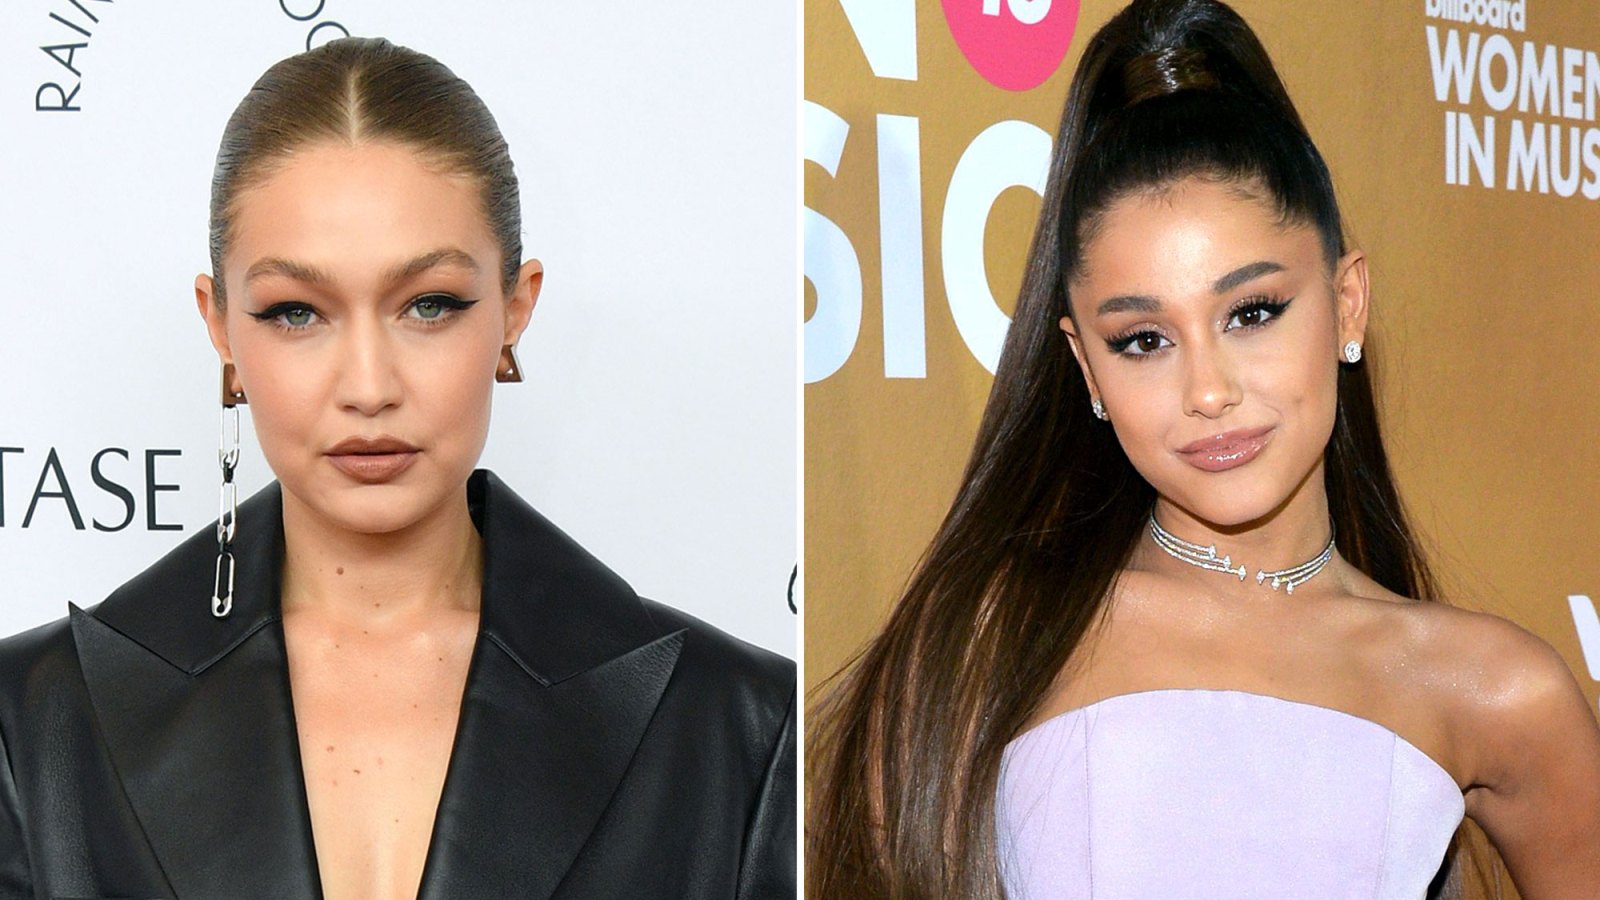 Fans Are Convinced Gigi Hadid Looks Like Ariana Grande in Her Moschino Campaign